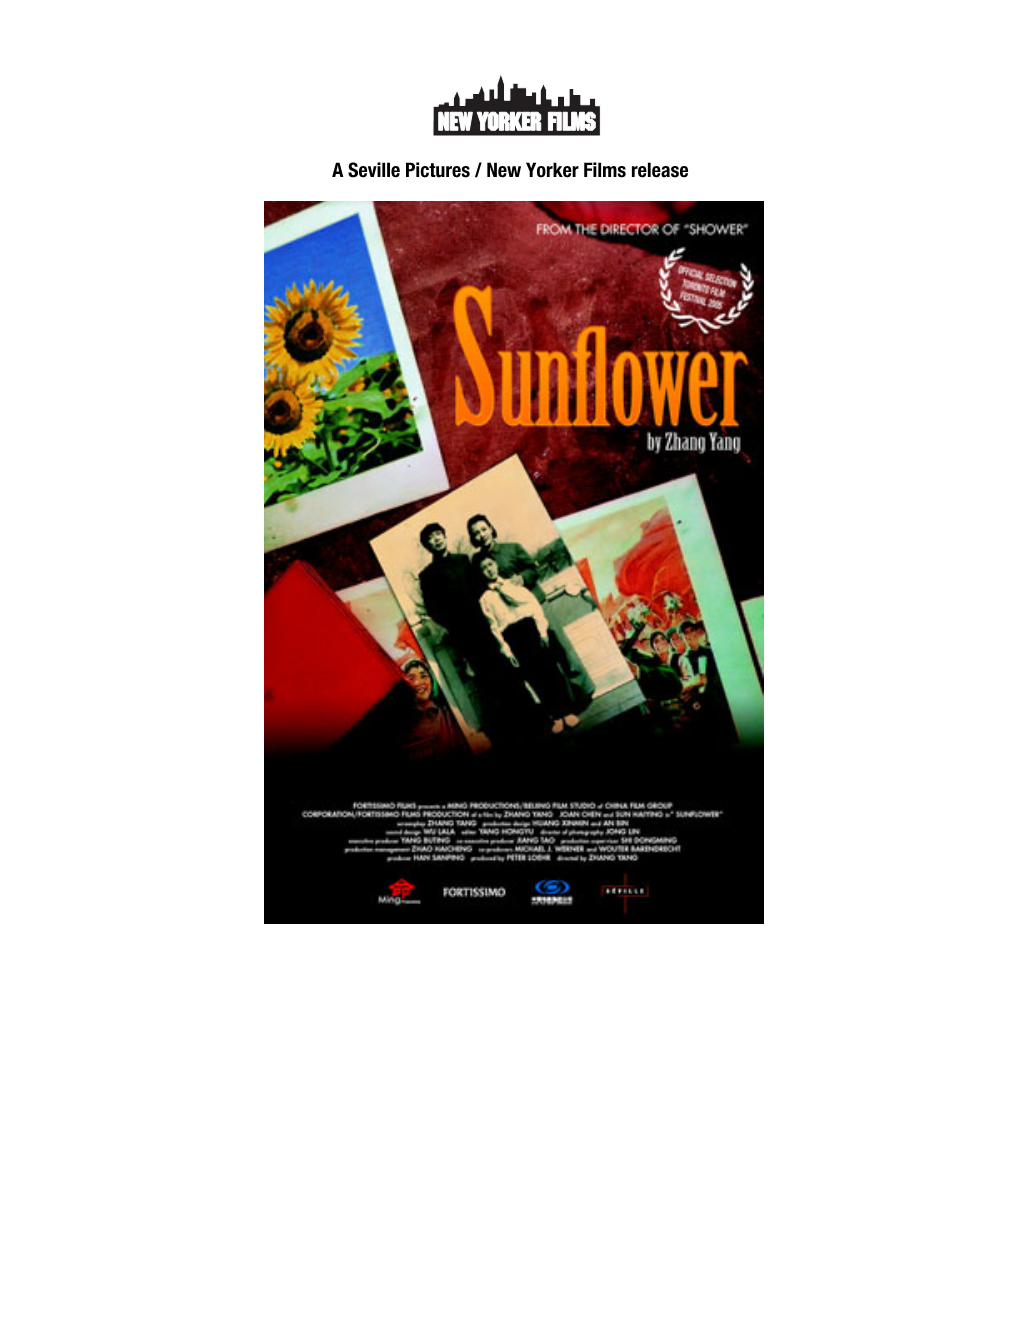 A Seville Pictures / New Yorker Films Release Sunflower